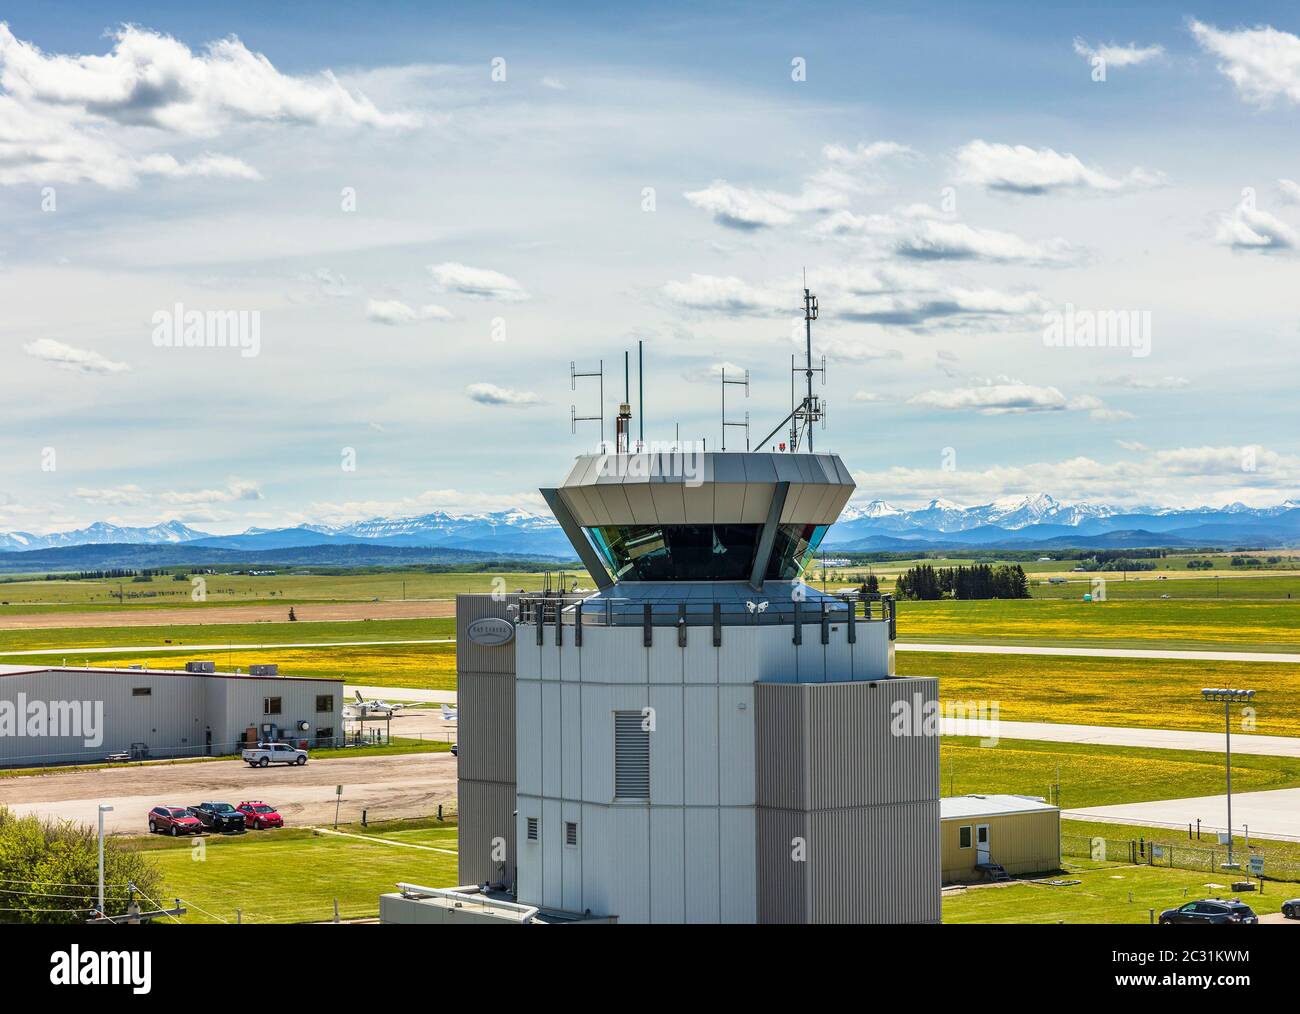 Eye level view of control tower at Springbank Airport, Alberta Canada Stock Photo